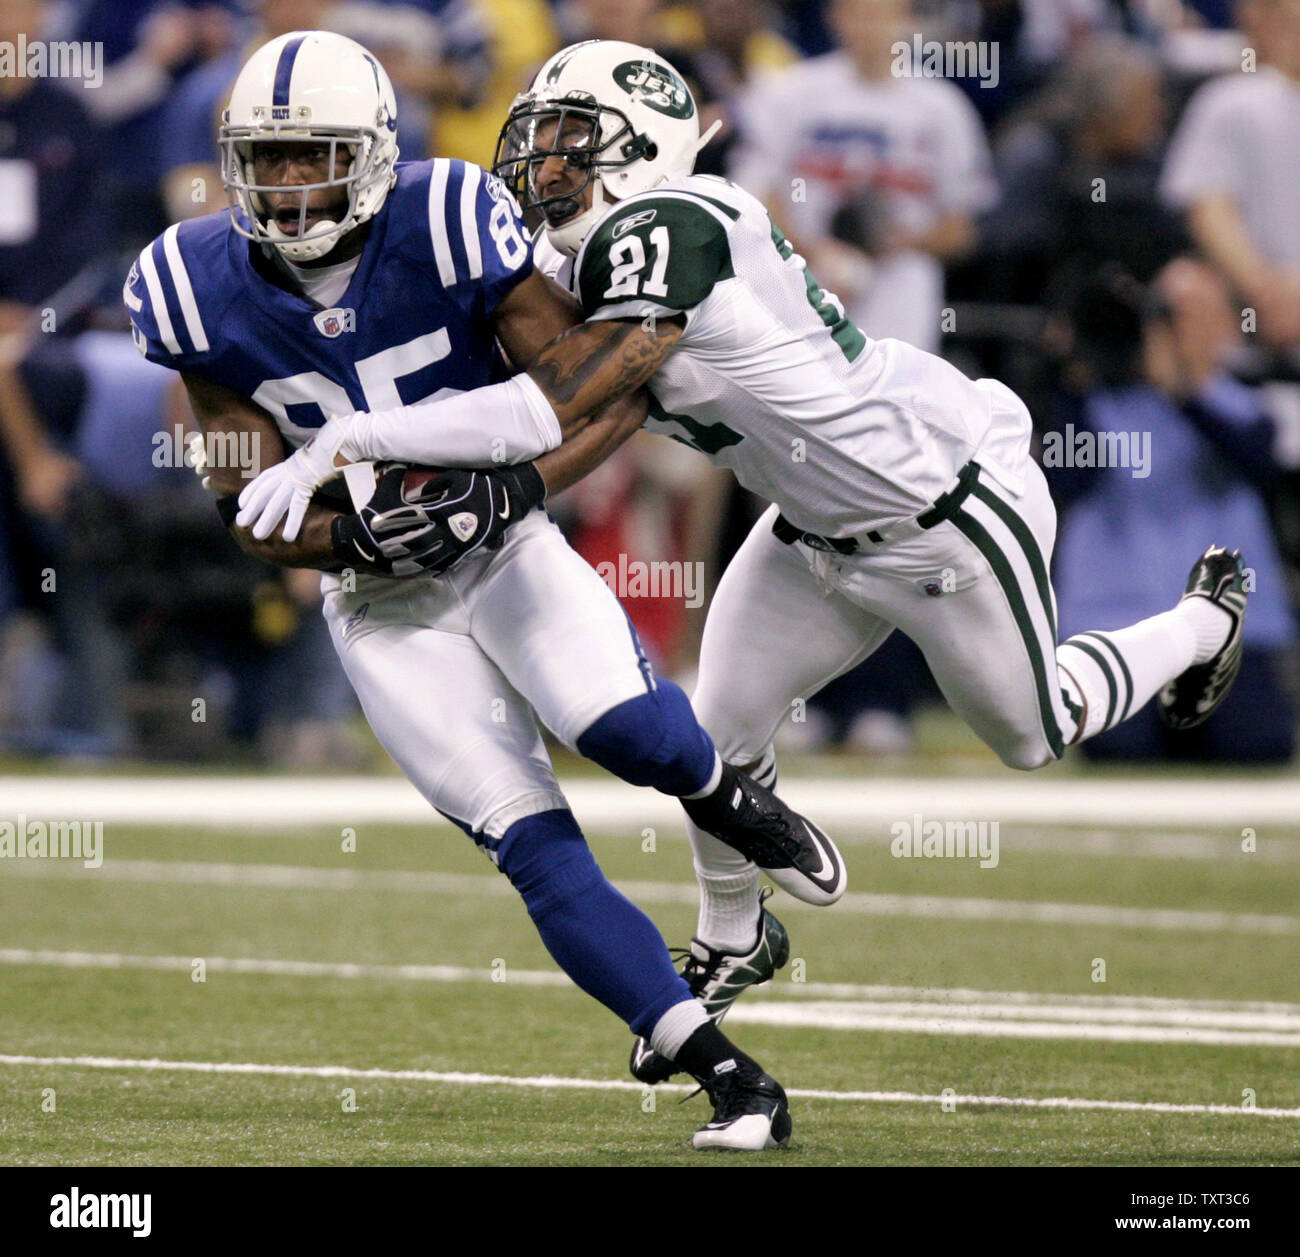 Indianapolis Colts wide receiver Pierre Garcon (85) grabs a pass in front  of New York Jets cornerback Dwight Lowery (21) during the first quarter of  their AFC Championship Playoff game at Lucas